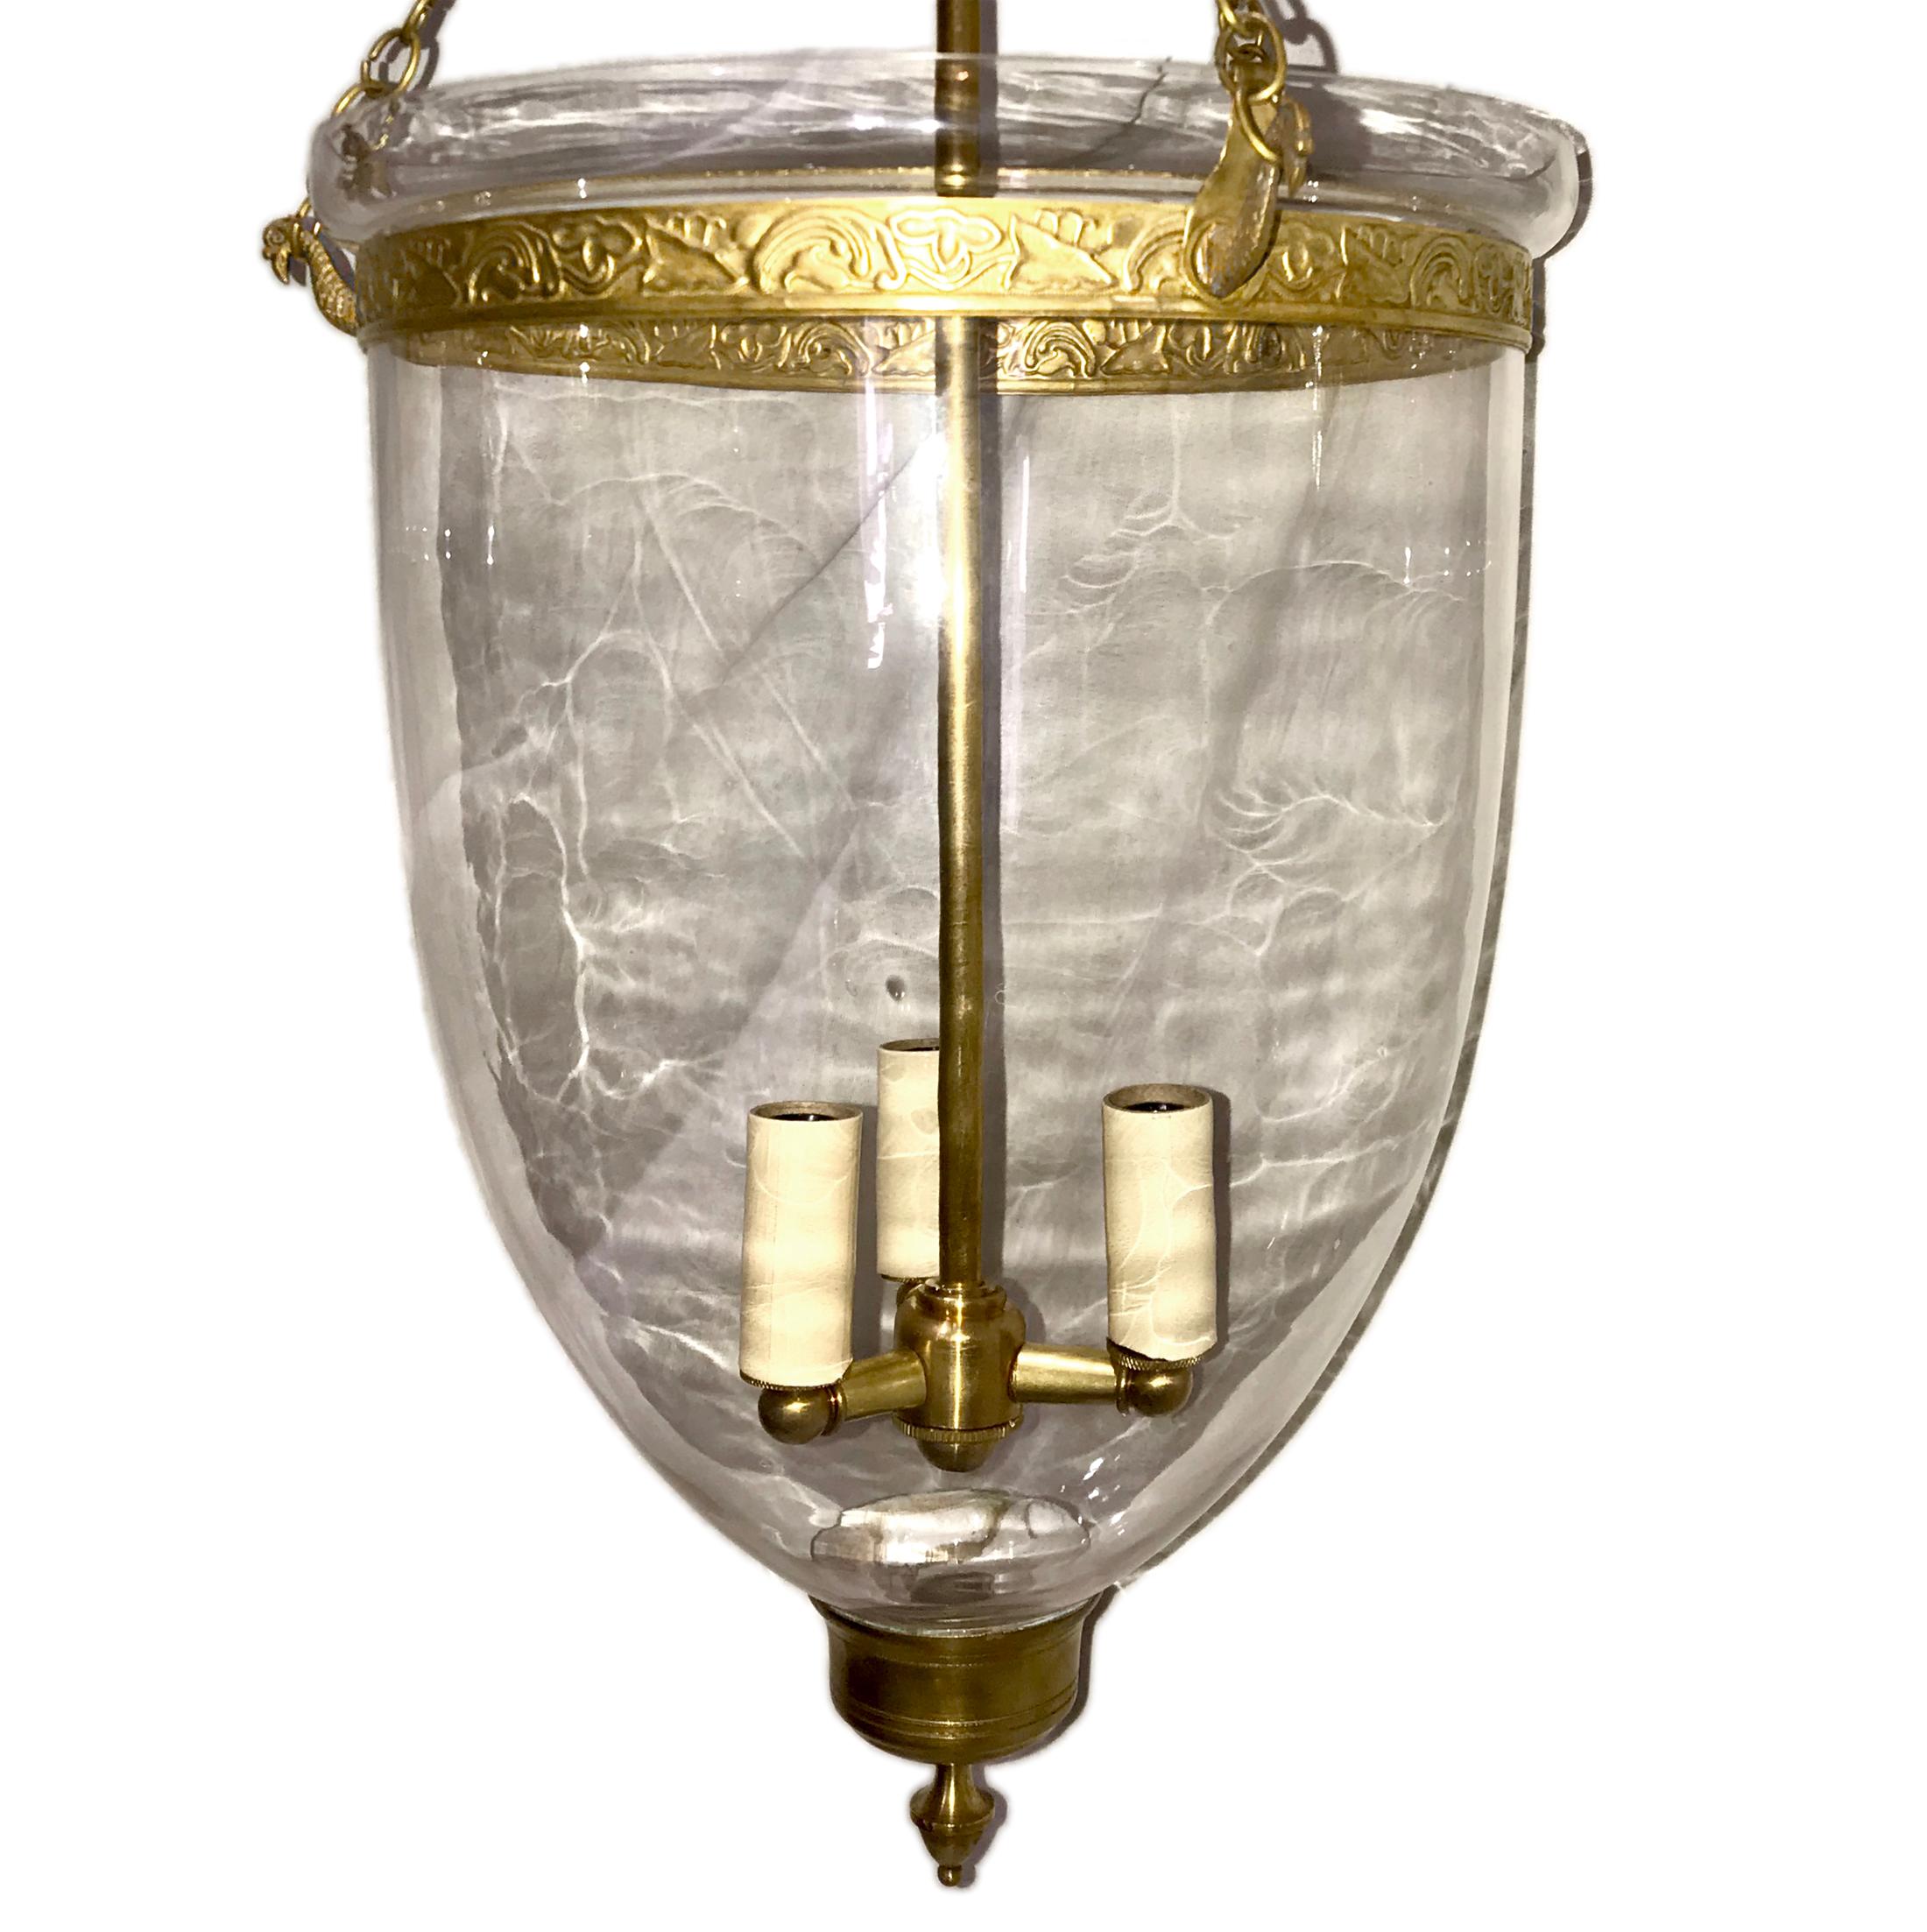 Set of circa 1930's English blown glass bell-jar lanterns with brass fittings. Sold Individually

Measurements:
Diameter 12